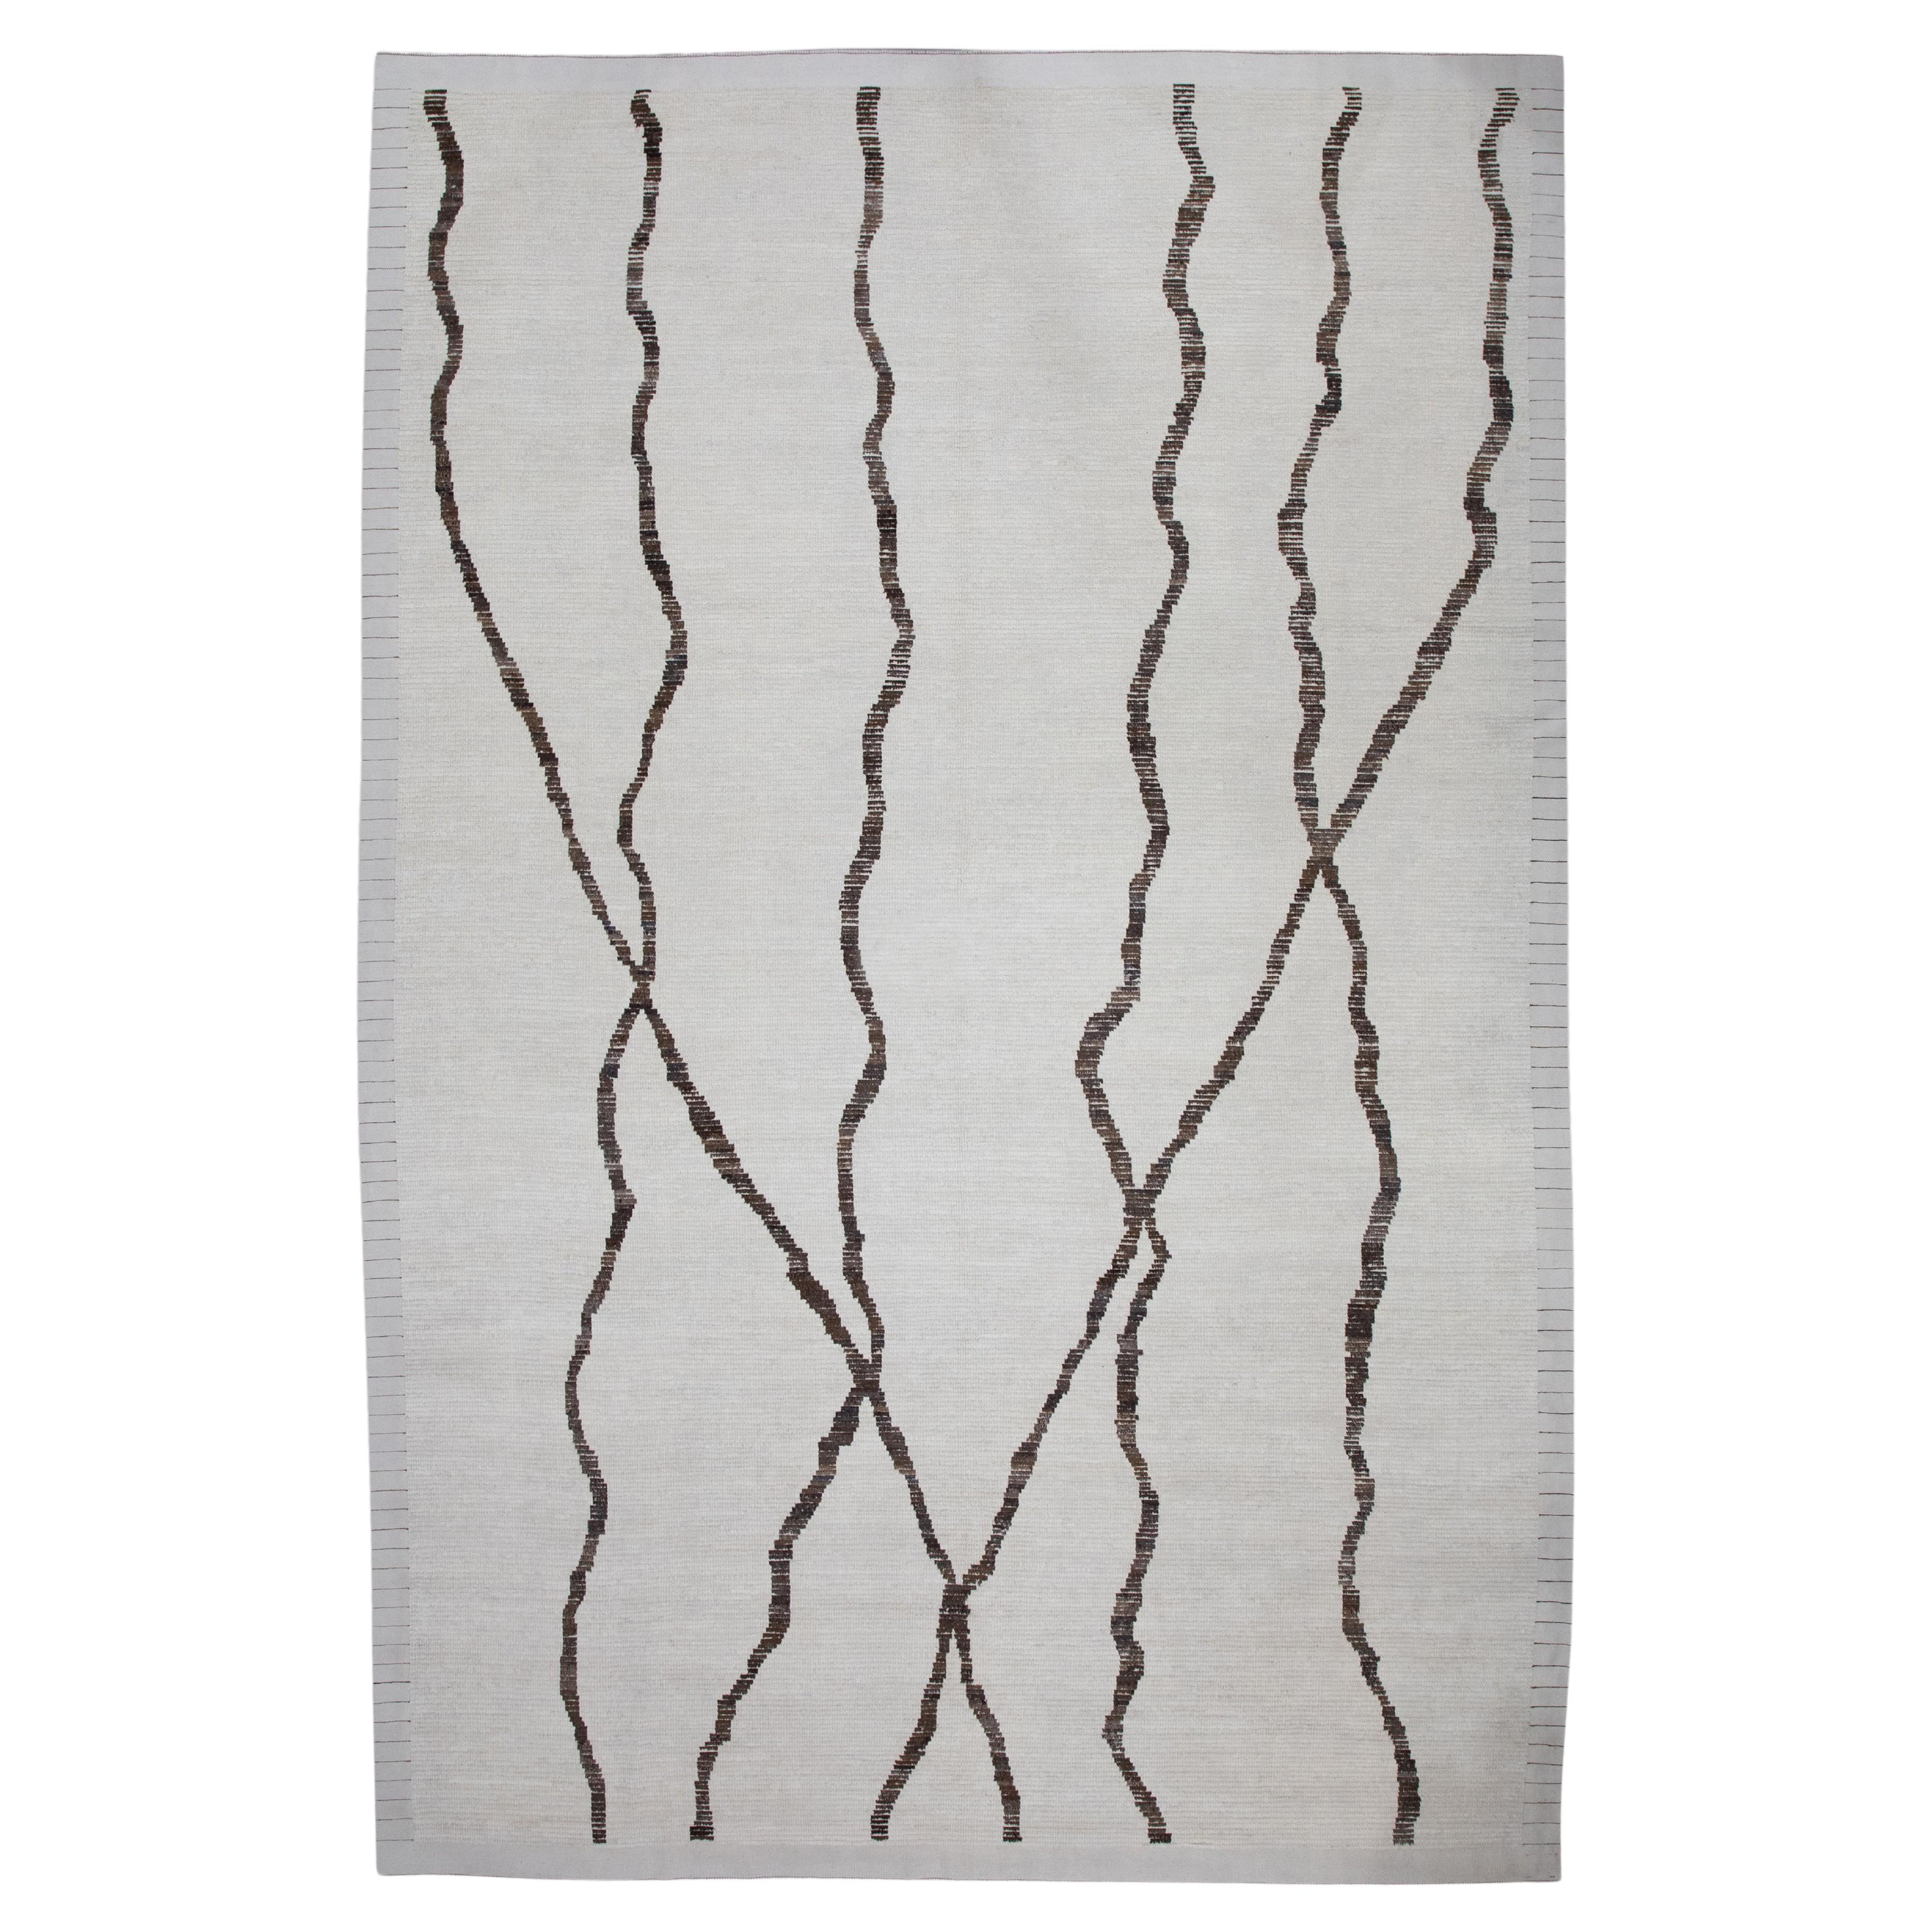 21st Century Modern Moroccan Style Wool Rug in Brown & Beige 9'10" X 14'4" For Sale